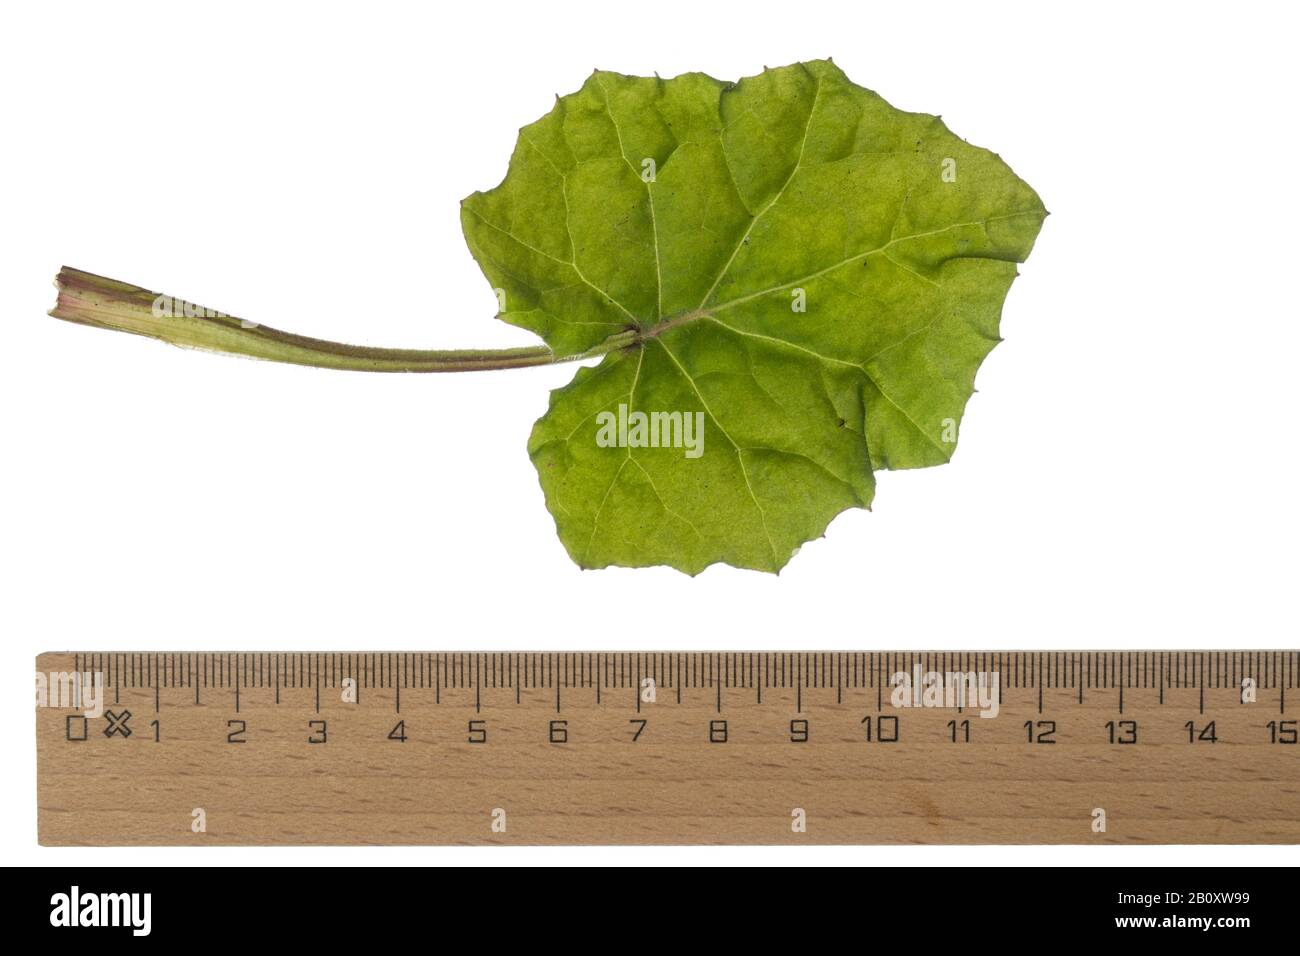 colts-foot, coltsfoot (Tussilago farfara), leaf, cutout with ruler, Germany Stock Photo